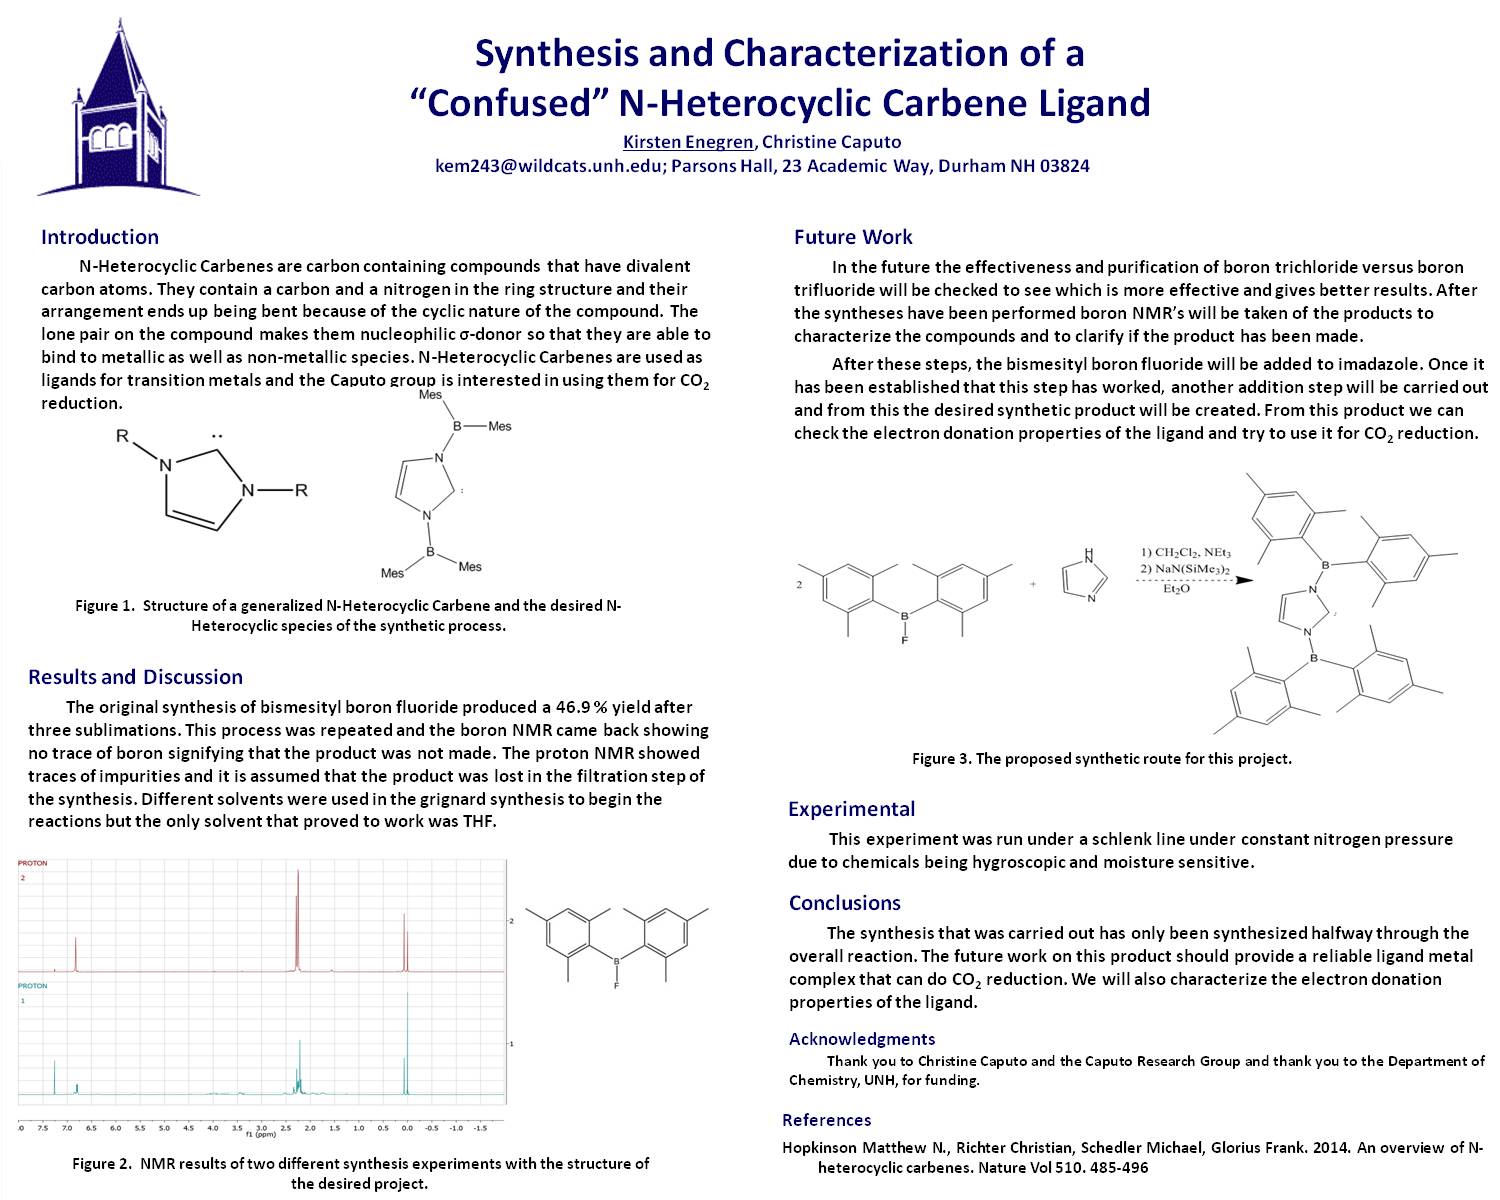 Synthesis And Characterization Of A "Confused" N-Heterocyclic Carbene Ligand by kem243